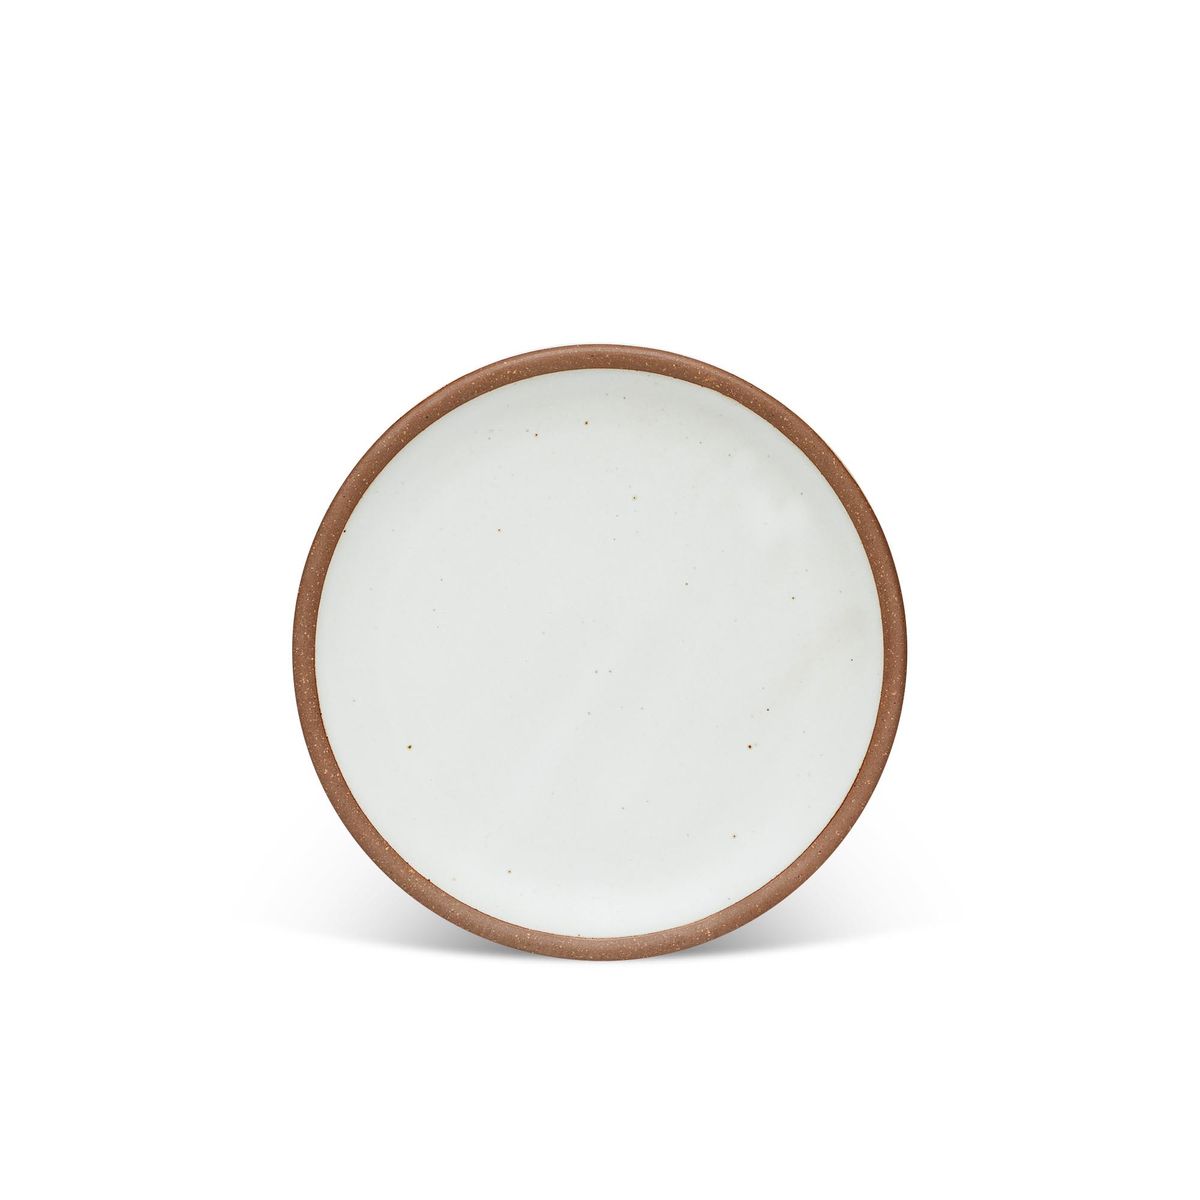 A medium sized ceramic plate in a cool white color featuring iron speckles and an unglazed rim.